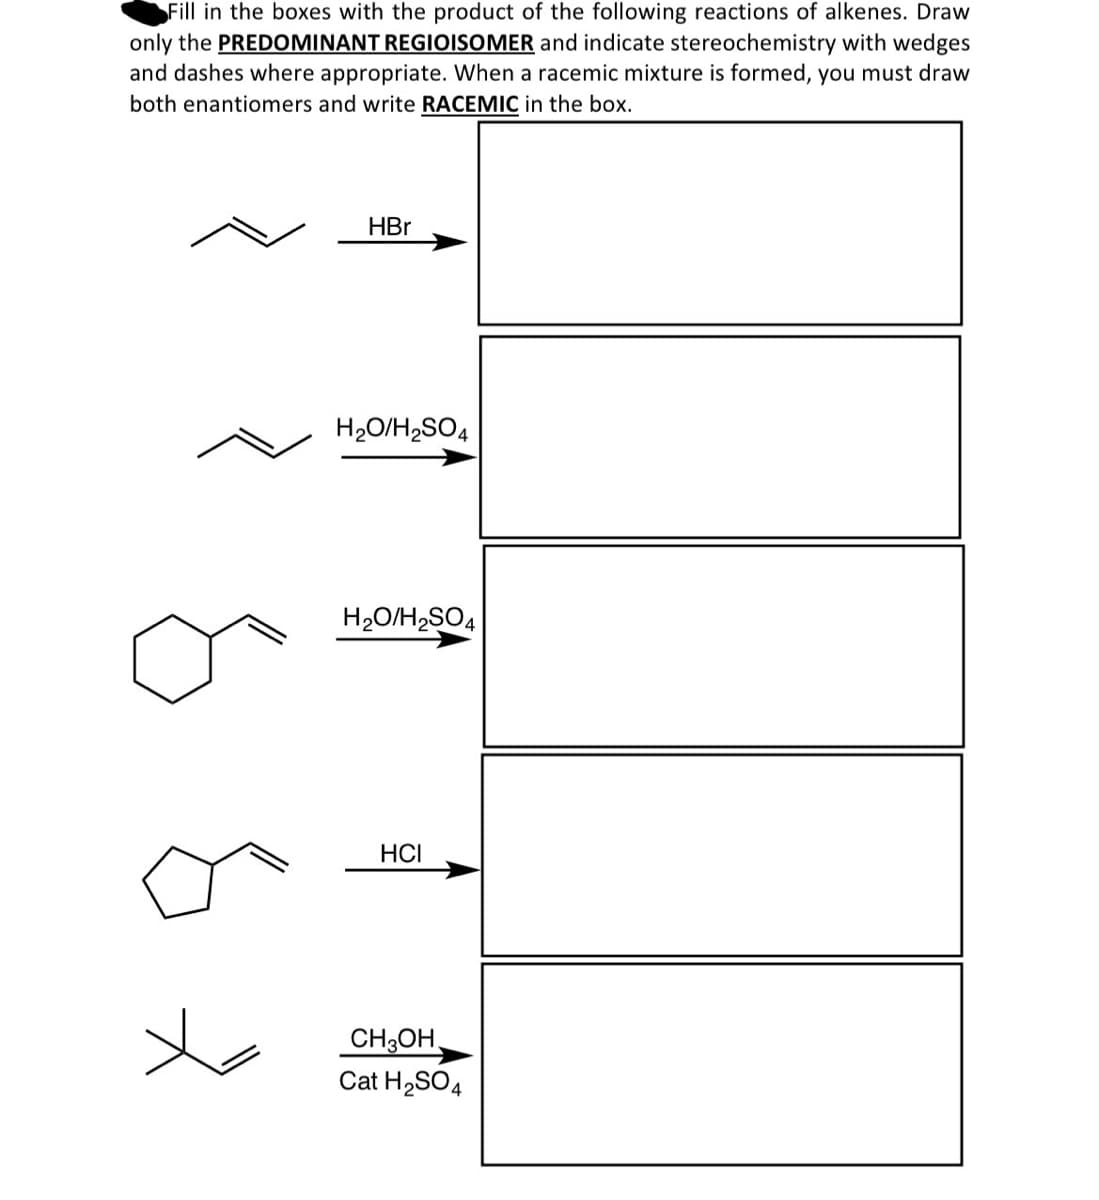 Fill in the boxes with the product of the following reactions of alkenes. Draw
only the PREDOMINANT REGIOISOMER and indicate stereochemistry with wedges
and dashes where appropriate. When a racemic mixture is formed, you must draw
both enantiomers and write RACEMIC in the box.
HBr
H₂O/H2SO4
H₂O/H2SO4
HCI
CH3OH
Cat H2SO4